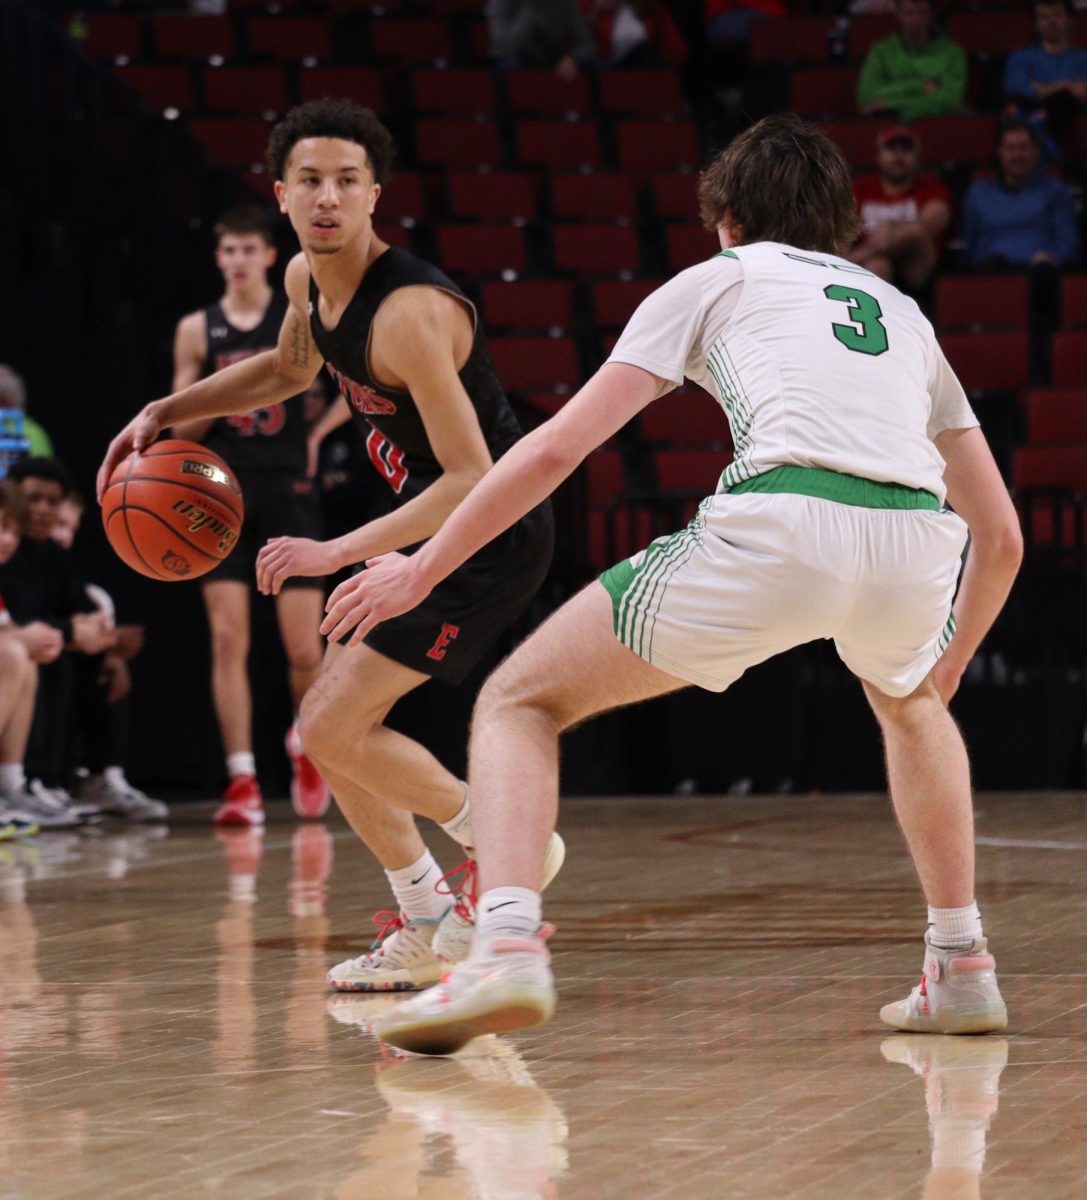 Senior Luke Howard attempts to dribble past Skyhawk Junior Kyle Cannon. Antlers lost to Skyhawks 61 to 69 in the State Quarter Finals.